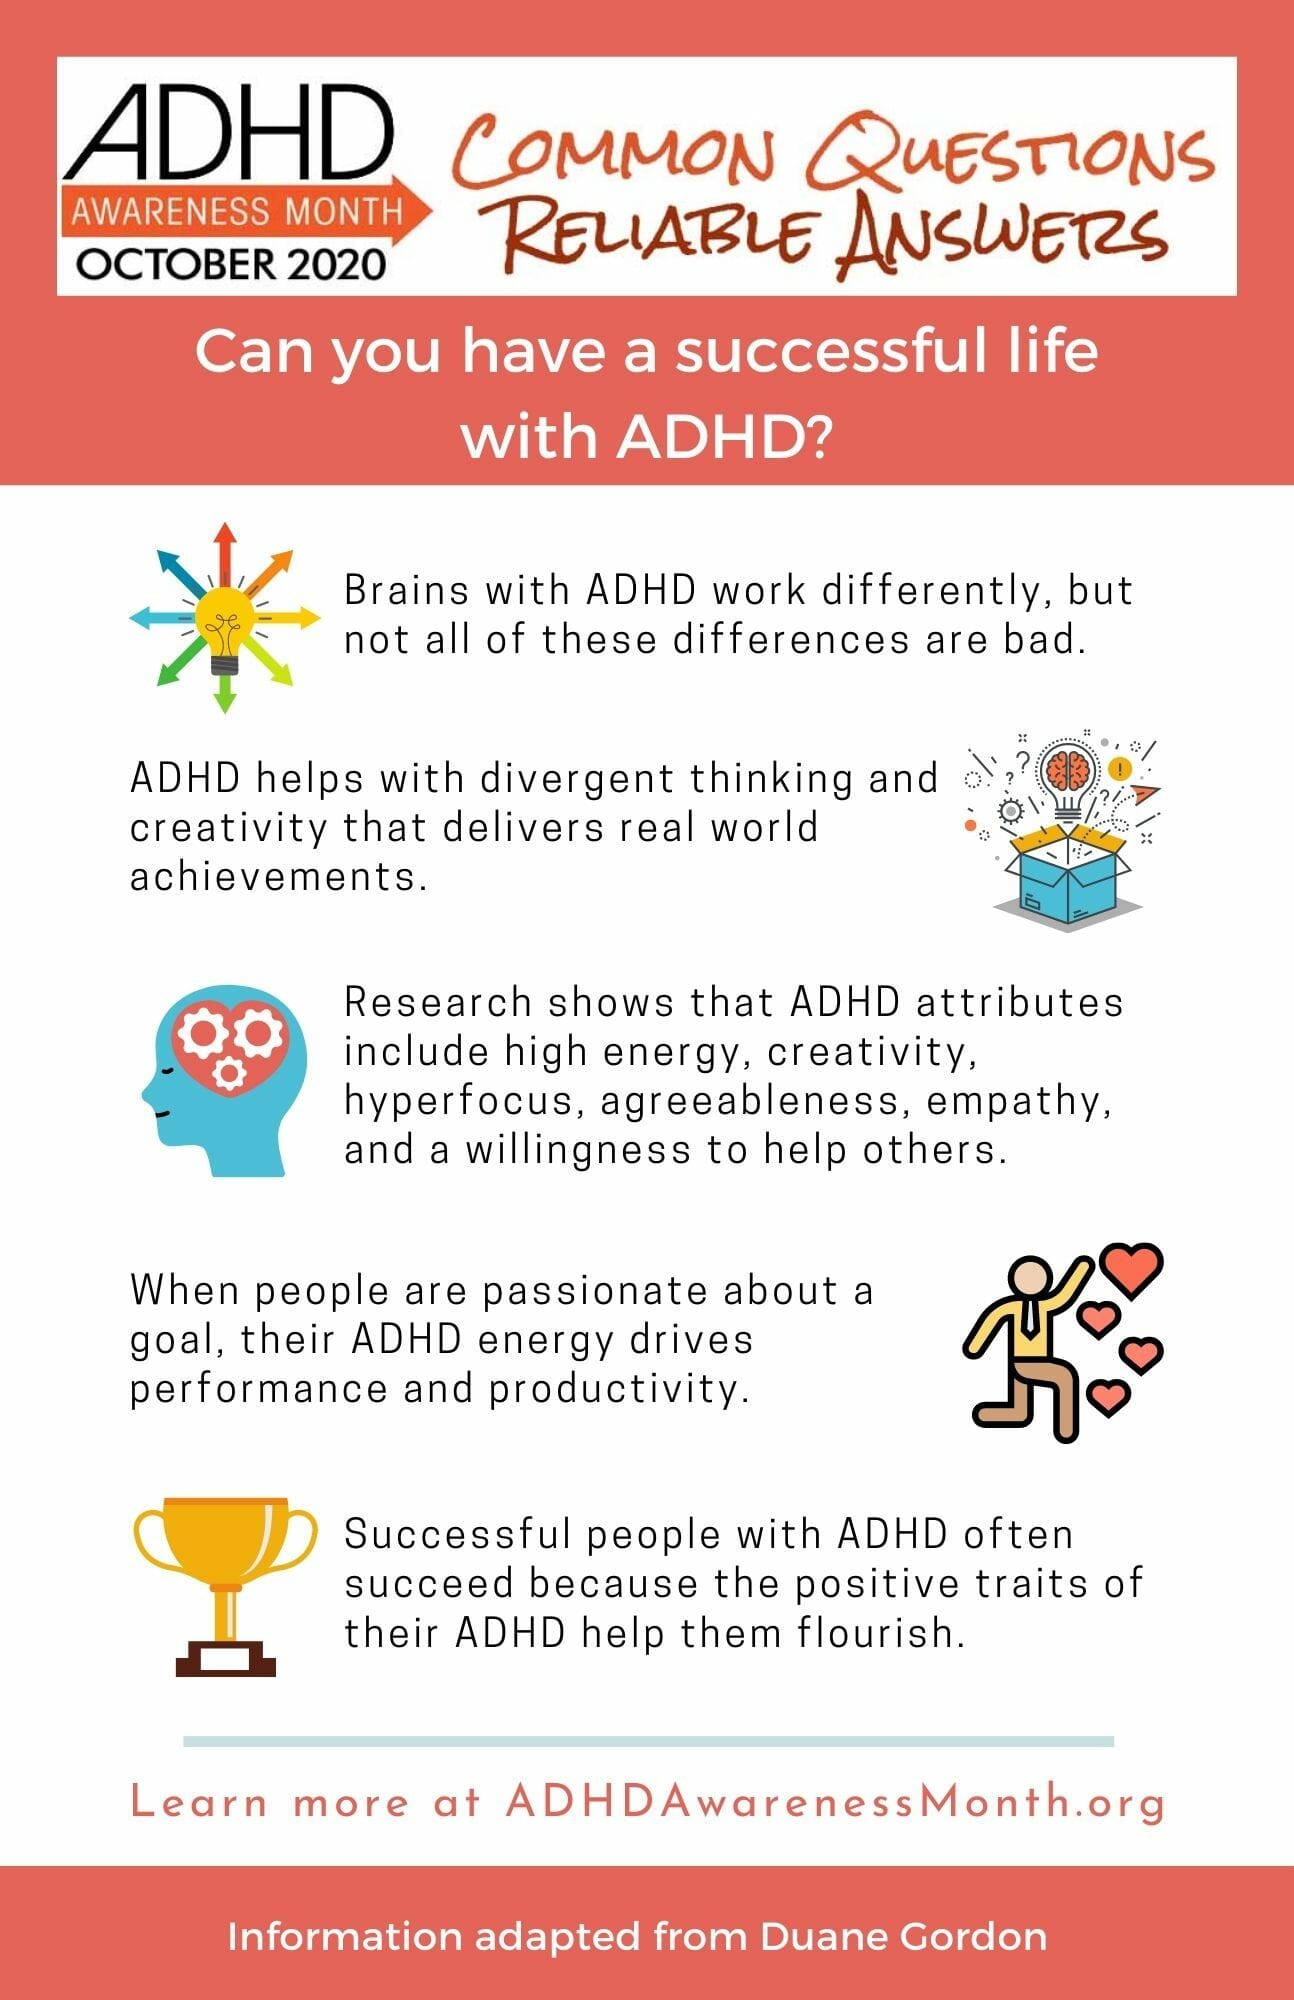 Are people with ADHD more successful?